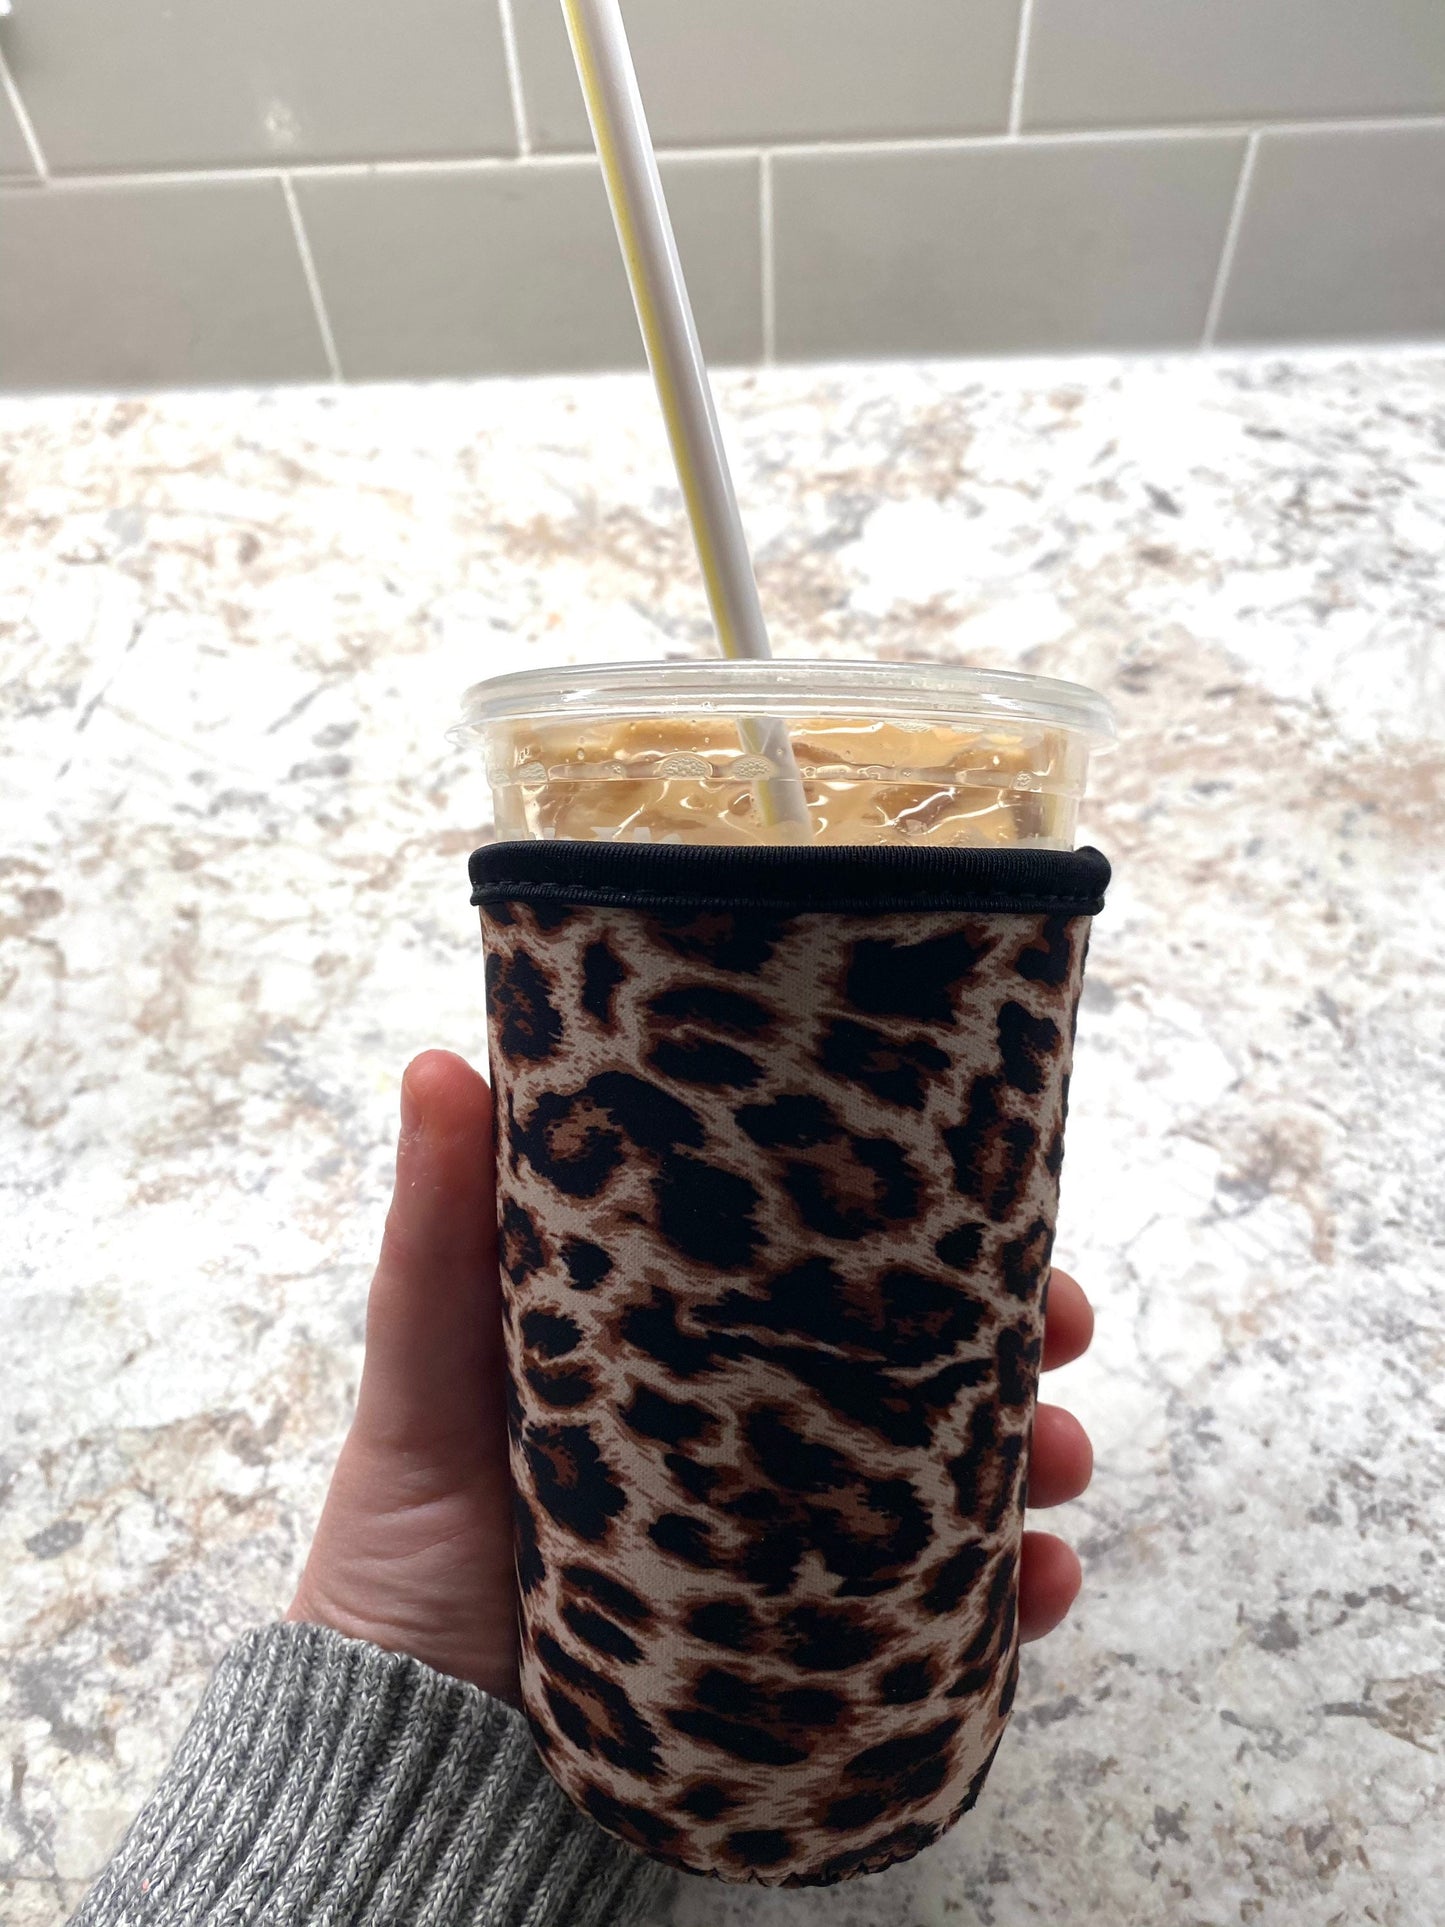 Iced Coffee cup coozie - Reusable, durable sleeve - Leopard Print